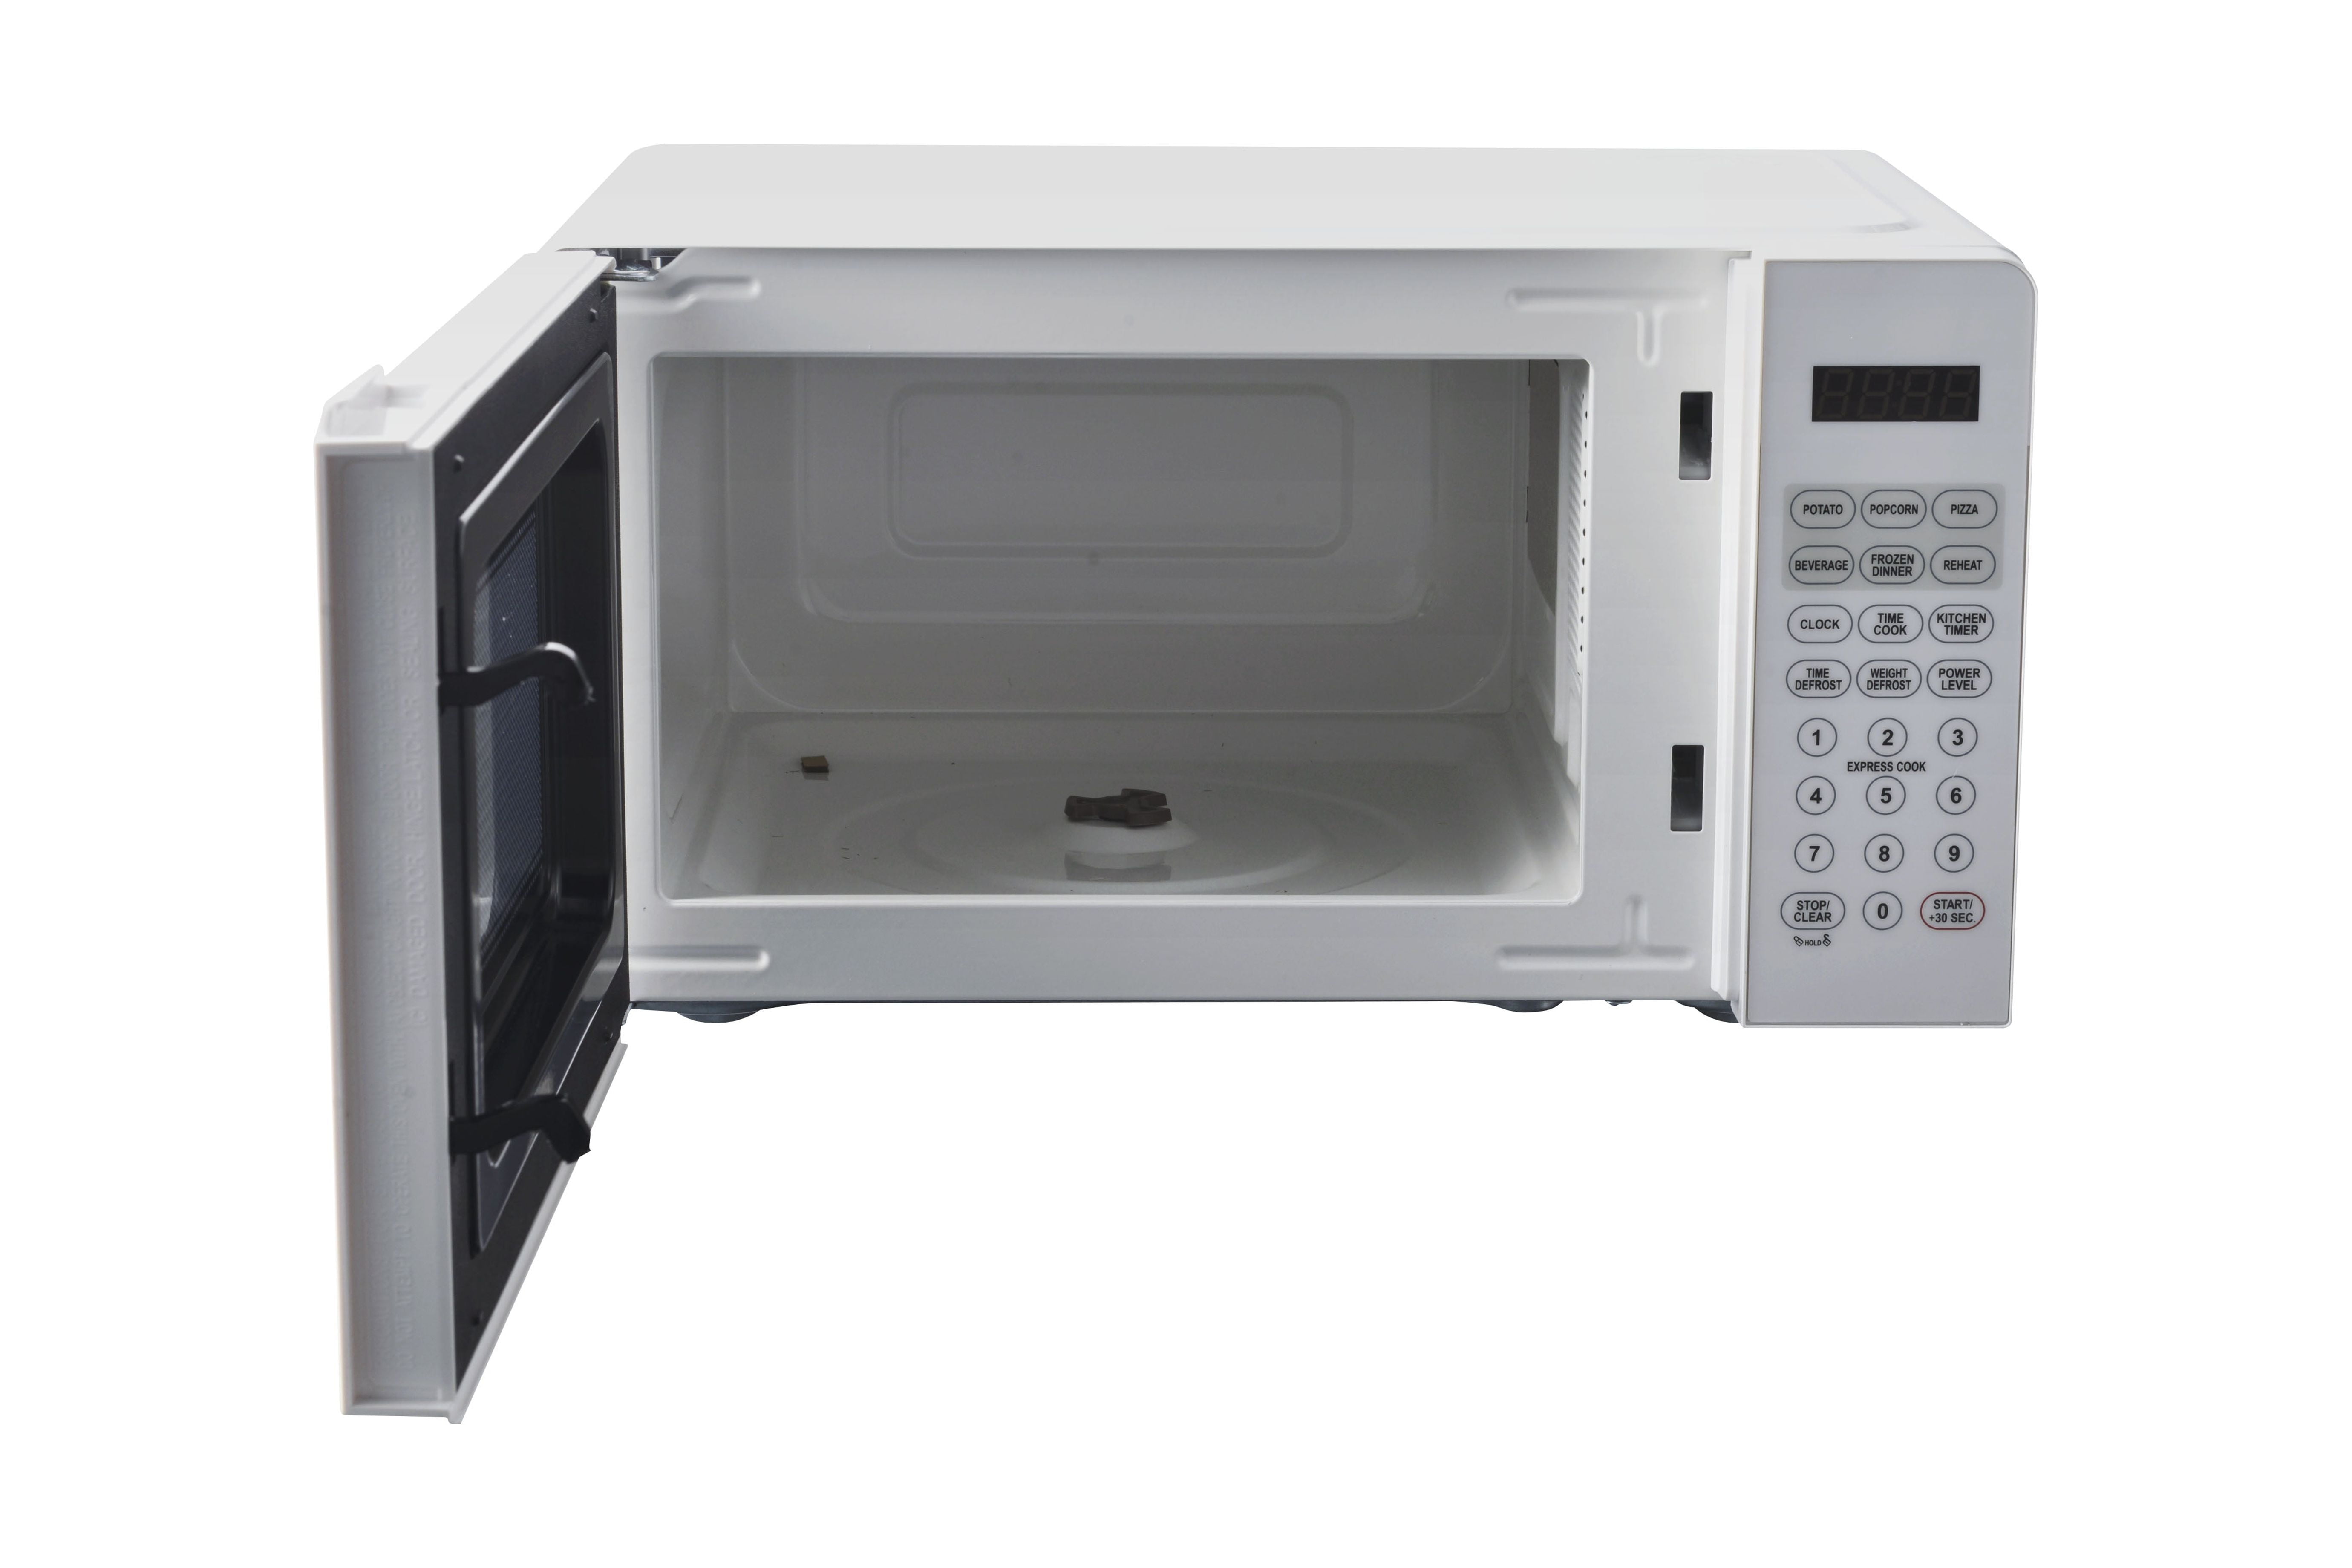 Countertop Microwave Oven Kitchen Home Office Dorm Digital LED 0.9 Cu.ft  900W 313085517548